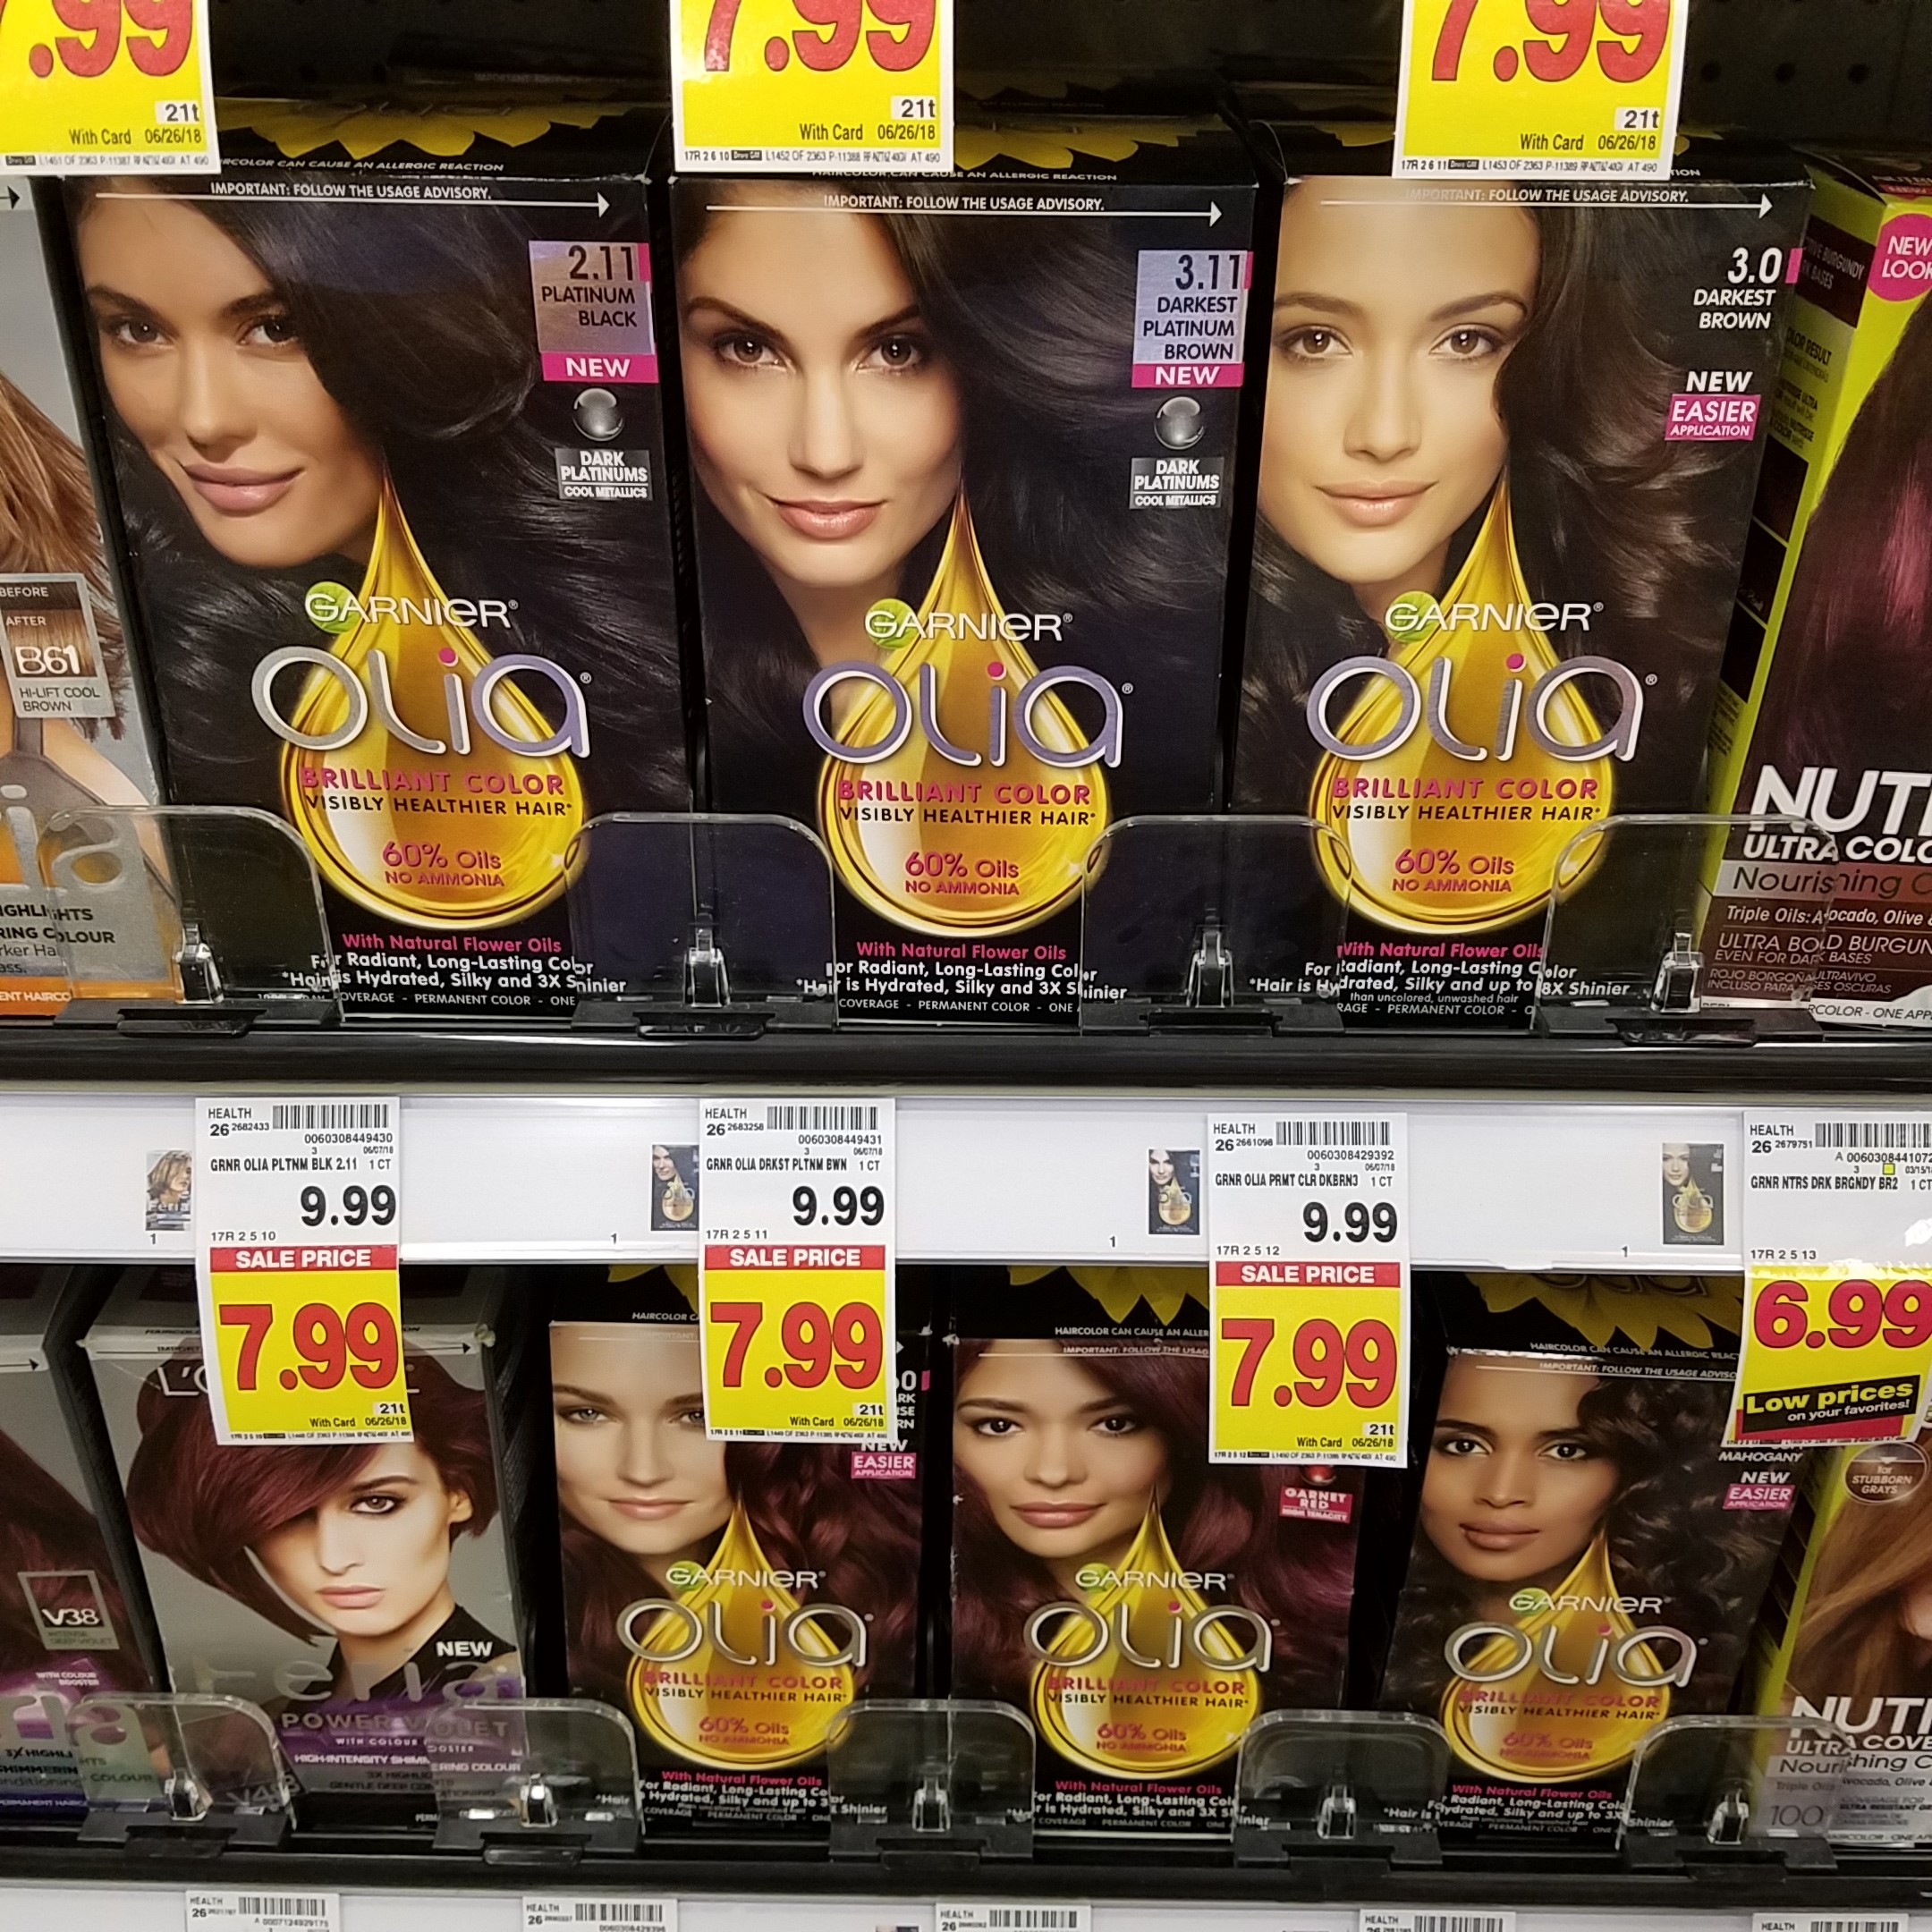 New Hair Color Coupons - Kroger Couponing